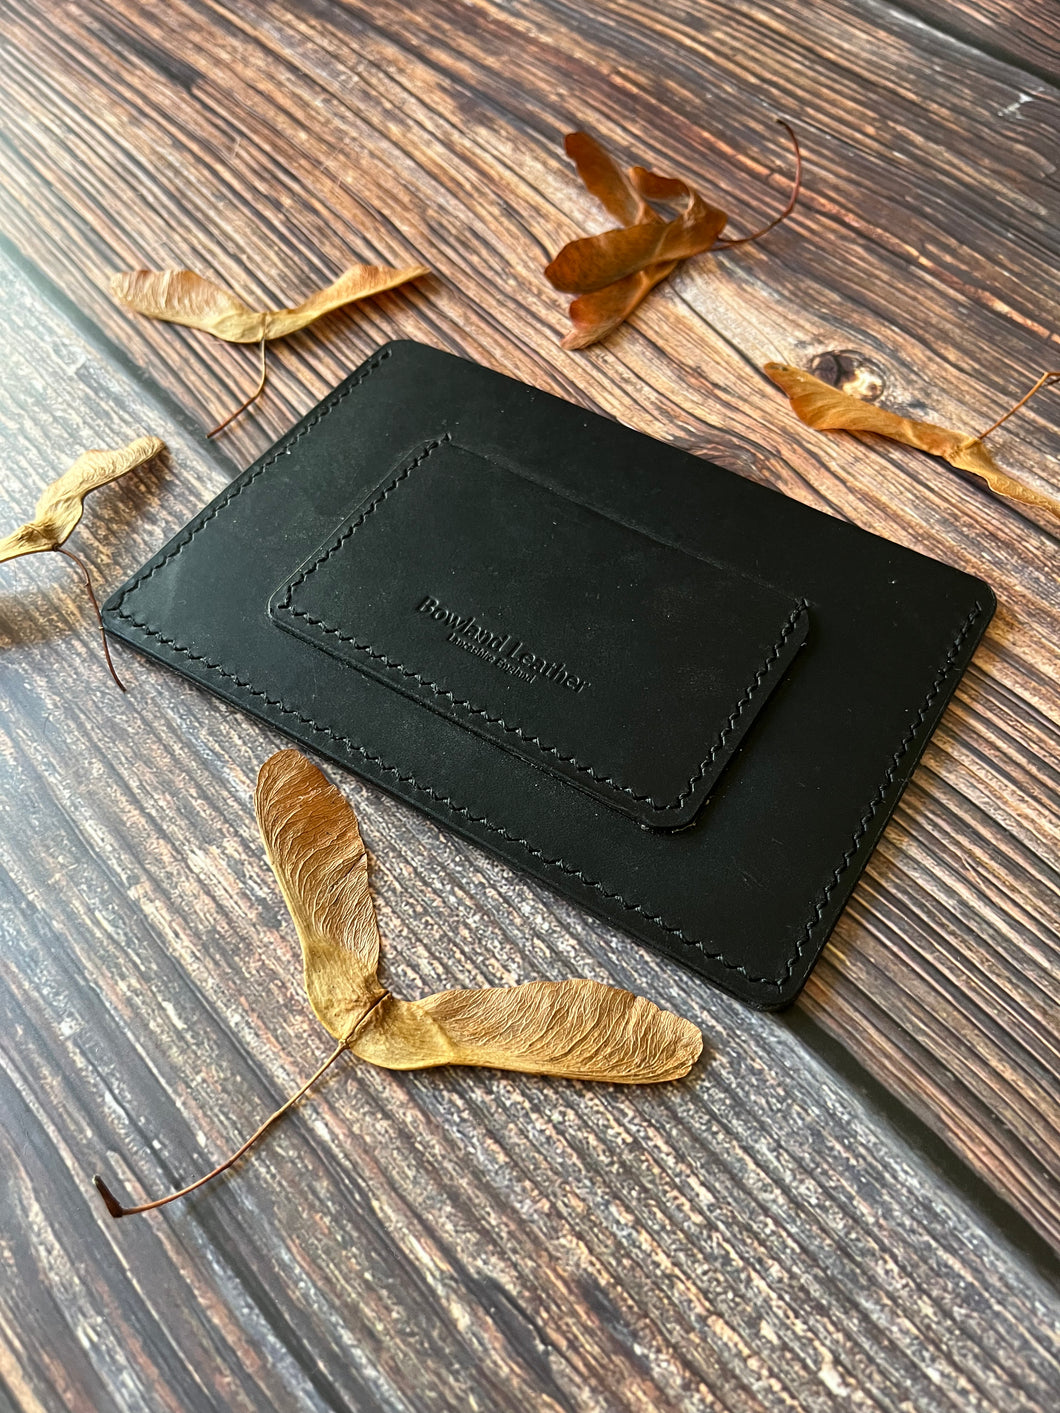 “Parlick” Leather Passport and Travel Documents Sleave.